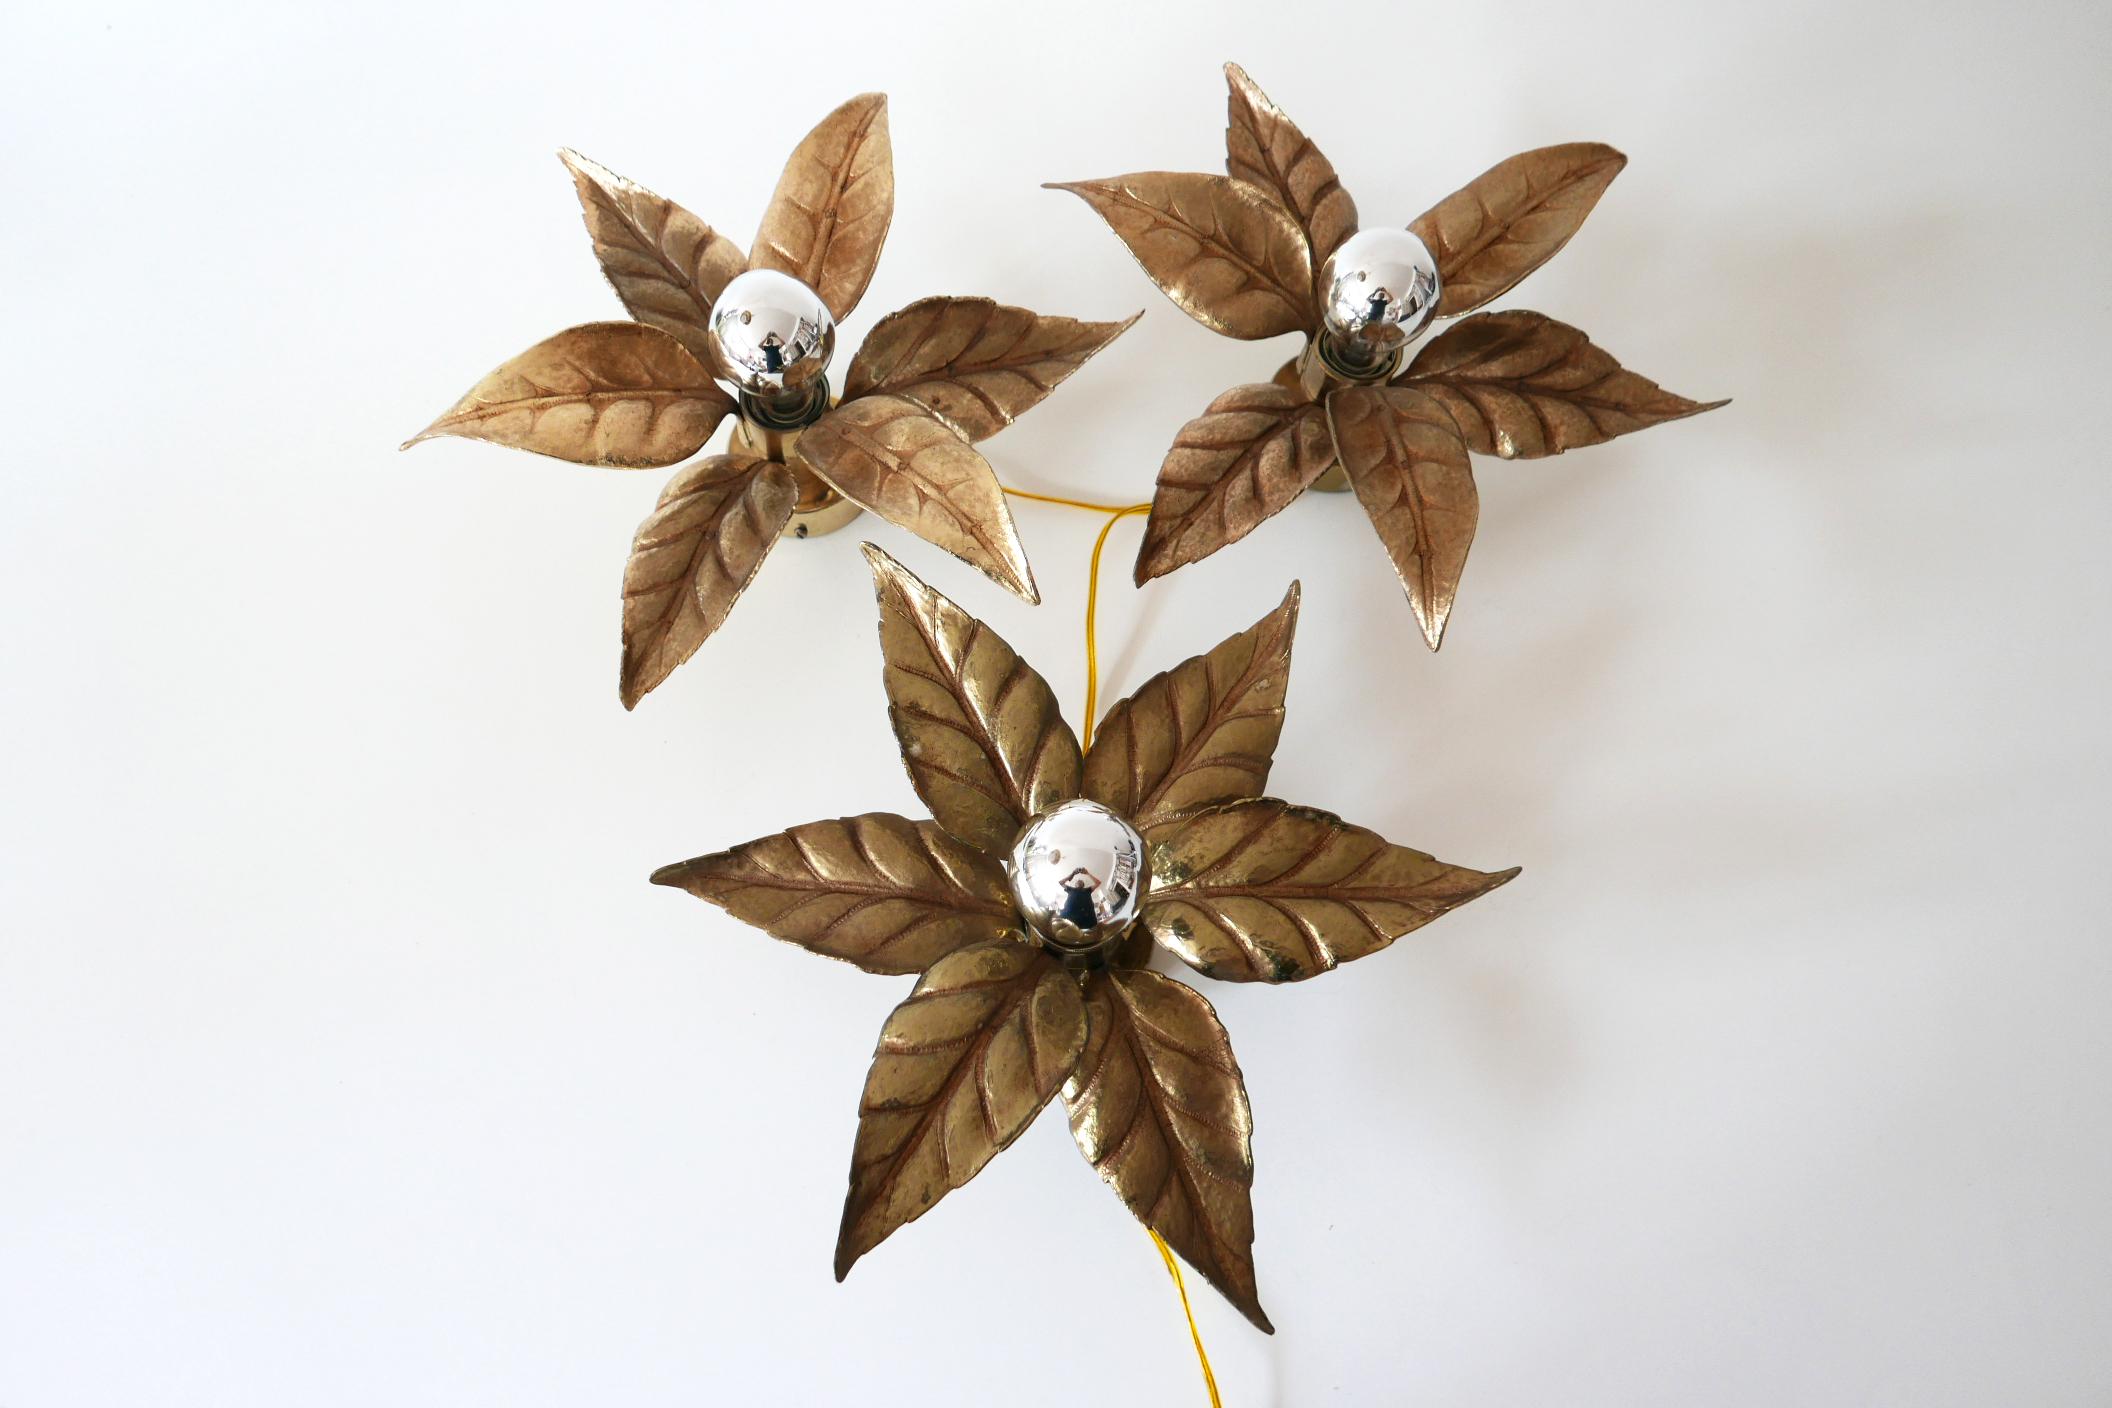 Set of three amazing Mid-Century Modern floral brass wall lamps or sconces. Designed by Willy Daro for Massive Lighting, 1970s, Belgium.

The lamps are executed massive cast brass and each lamp needs 1 x E27 Edison screw fit bulb. They are wired, in